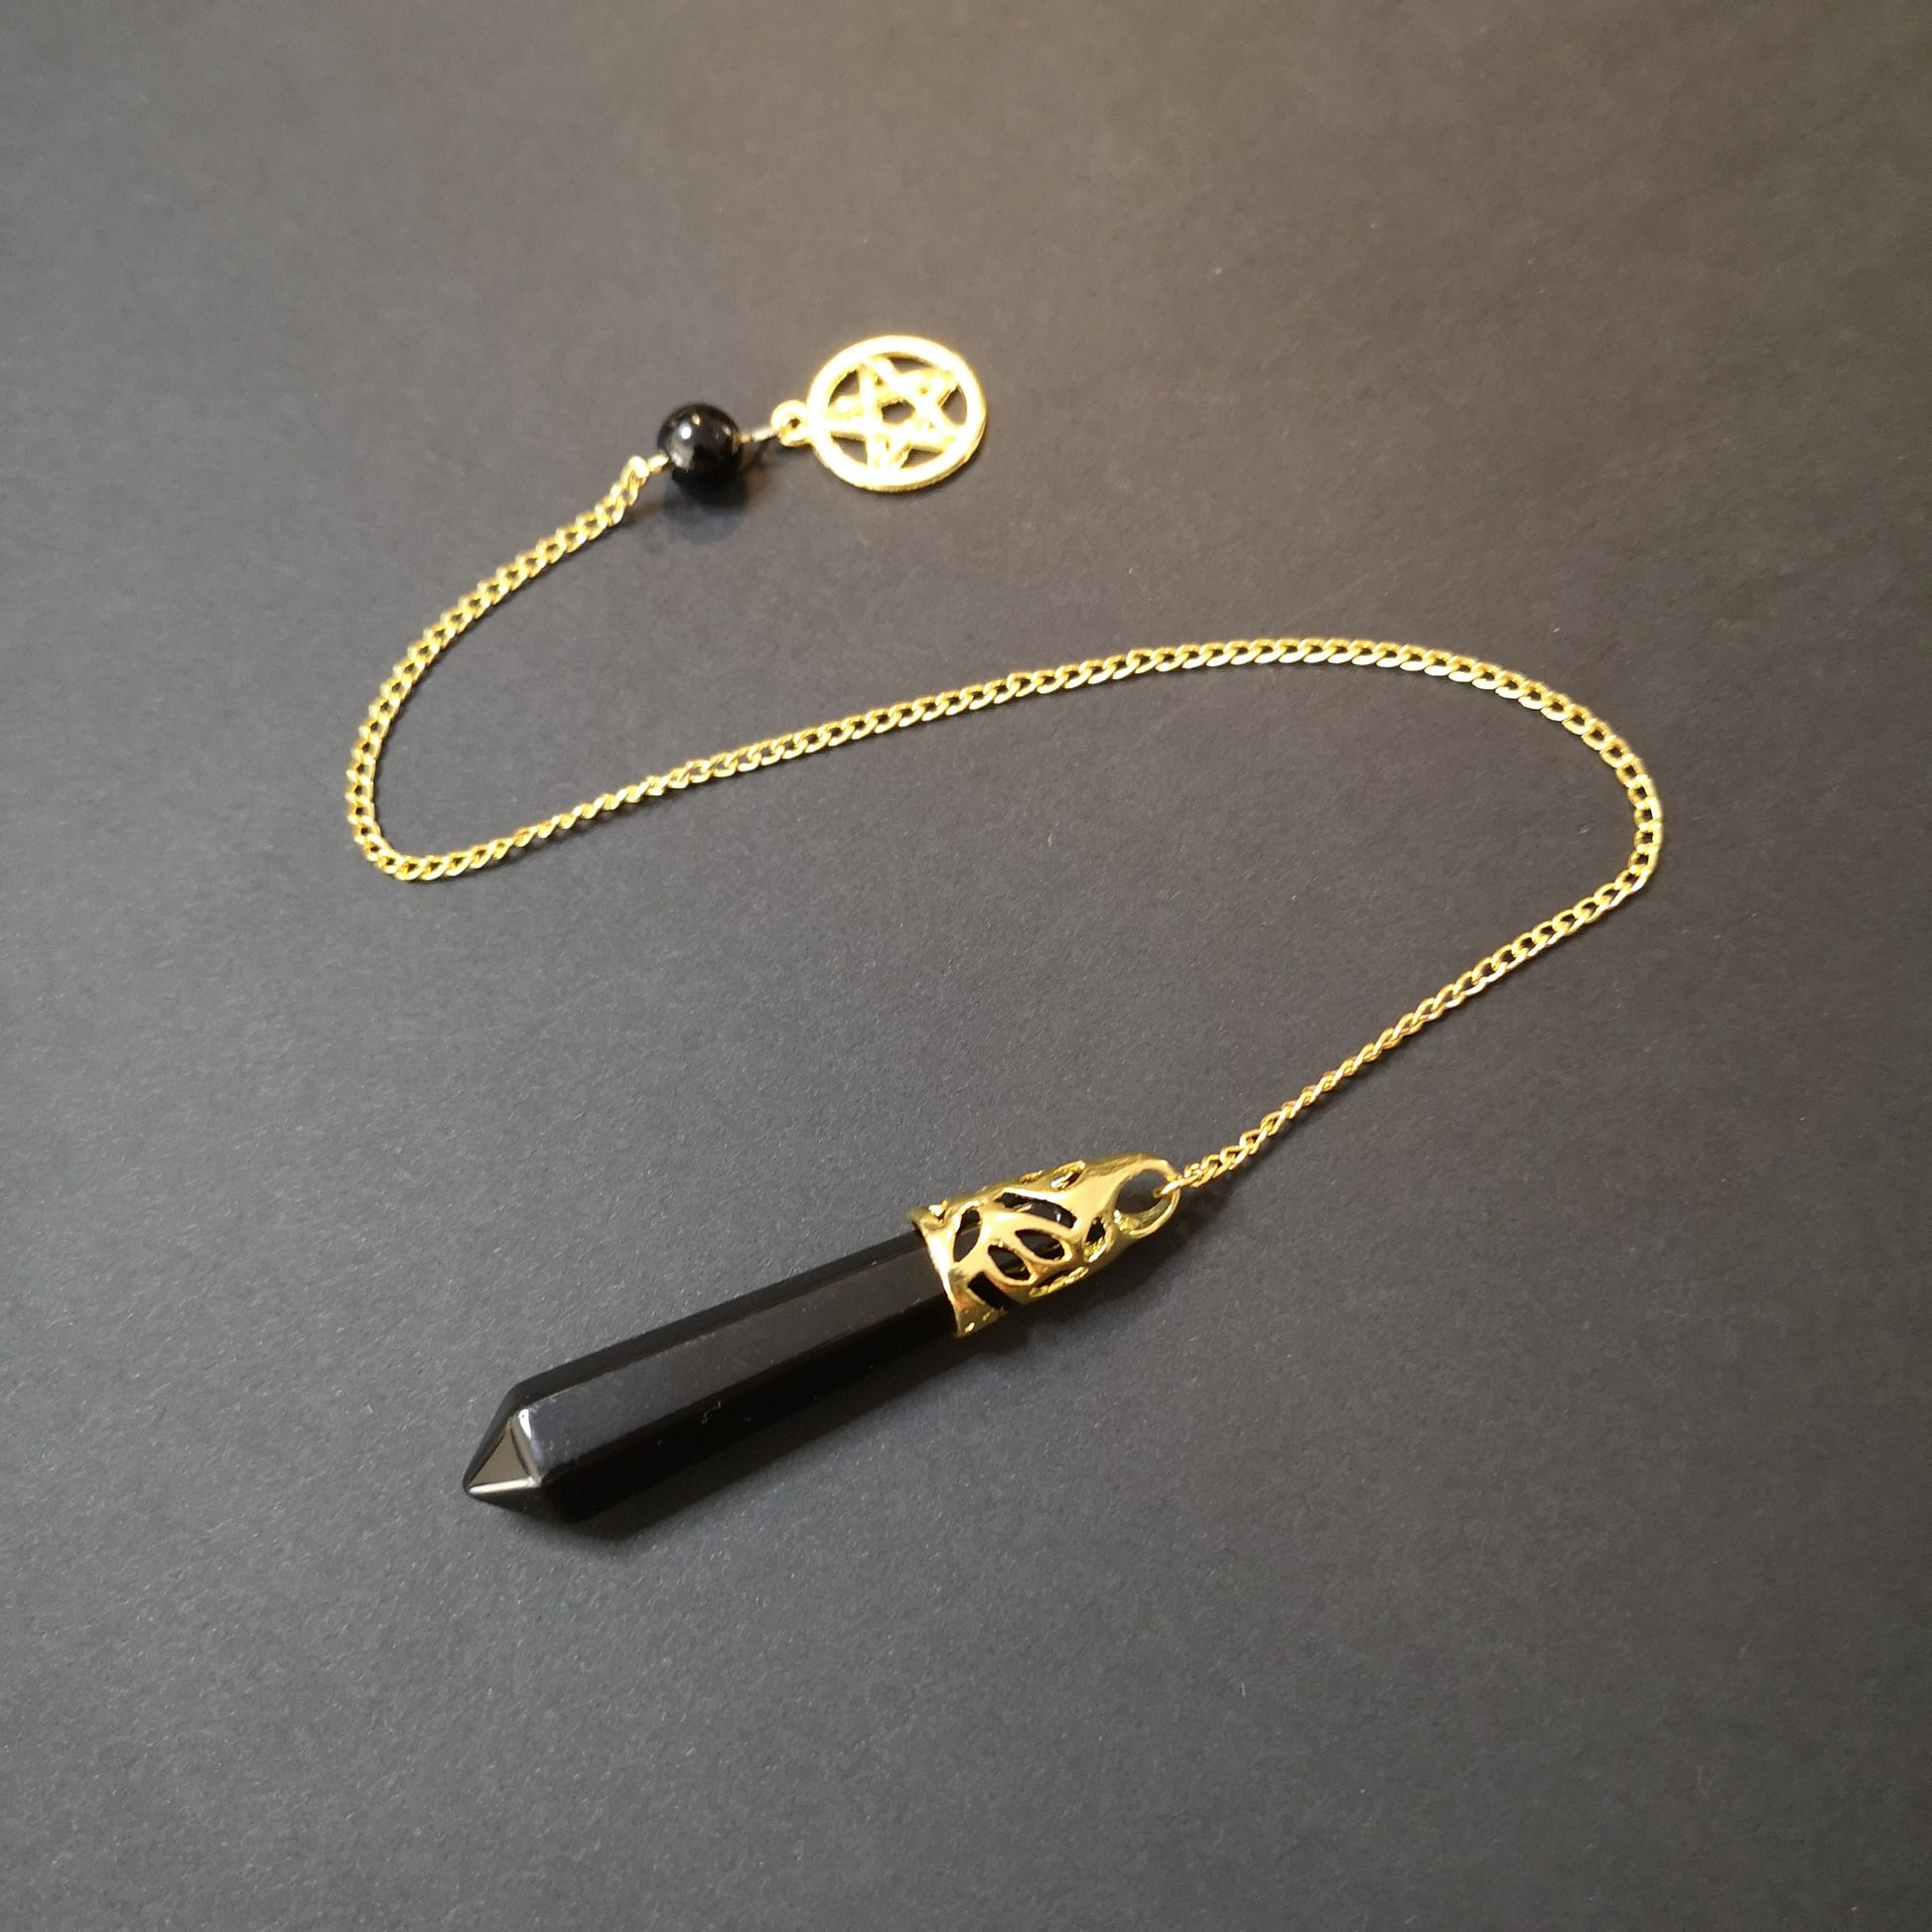 Golden onyx and pentacle dowsing pendulum - The French Witch shop